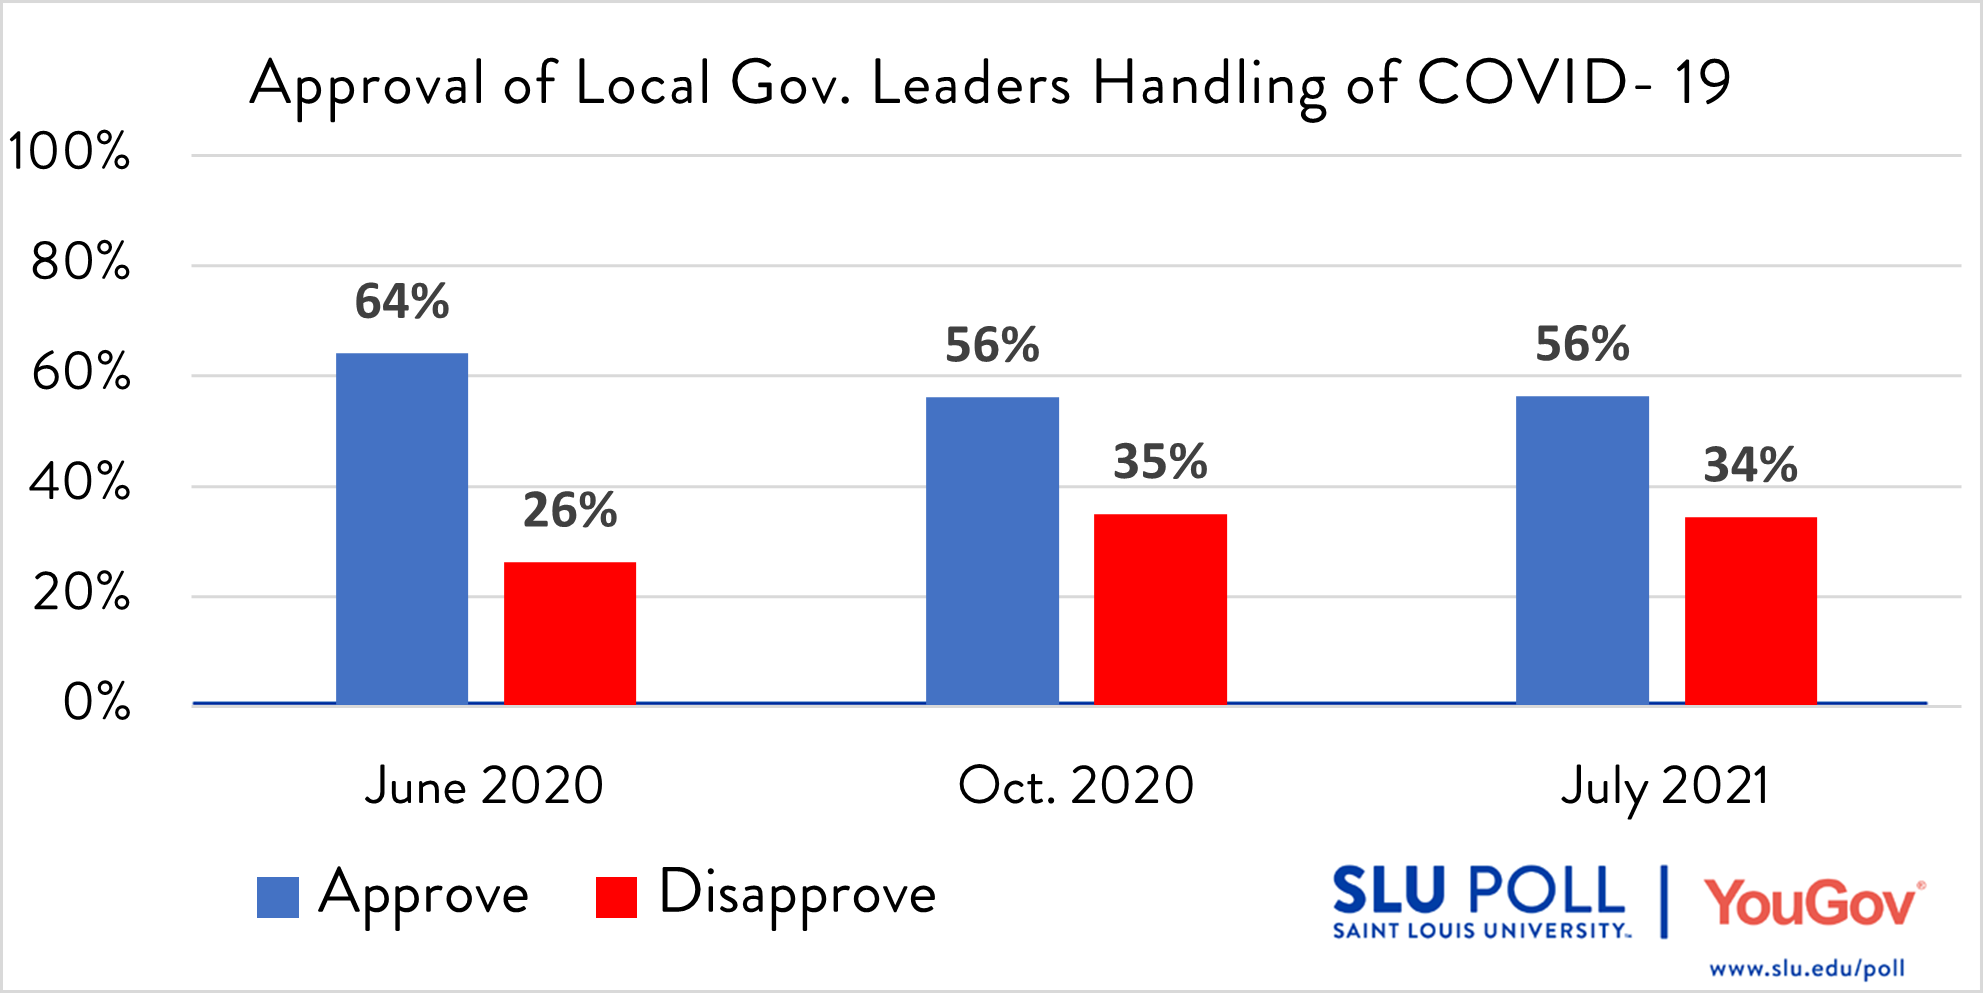 Do you approve or disapprove of the way each has handled the COVID-19 Pandemic… Your local government leaders (i.e., Mayor and County Executives)? - Strongly approve: 12% - Approve: 44% - Disapprove: 20% - Strongly disapprove: 15% - Not sure: 9% Subsample Question: The sample size for this question is 473. The margin of error for the full results for the above question is ± 5.81%.